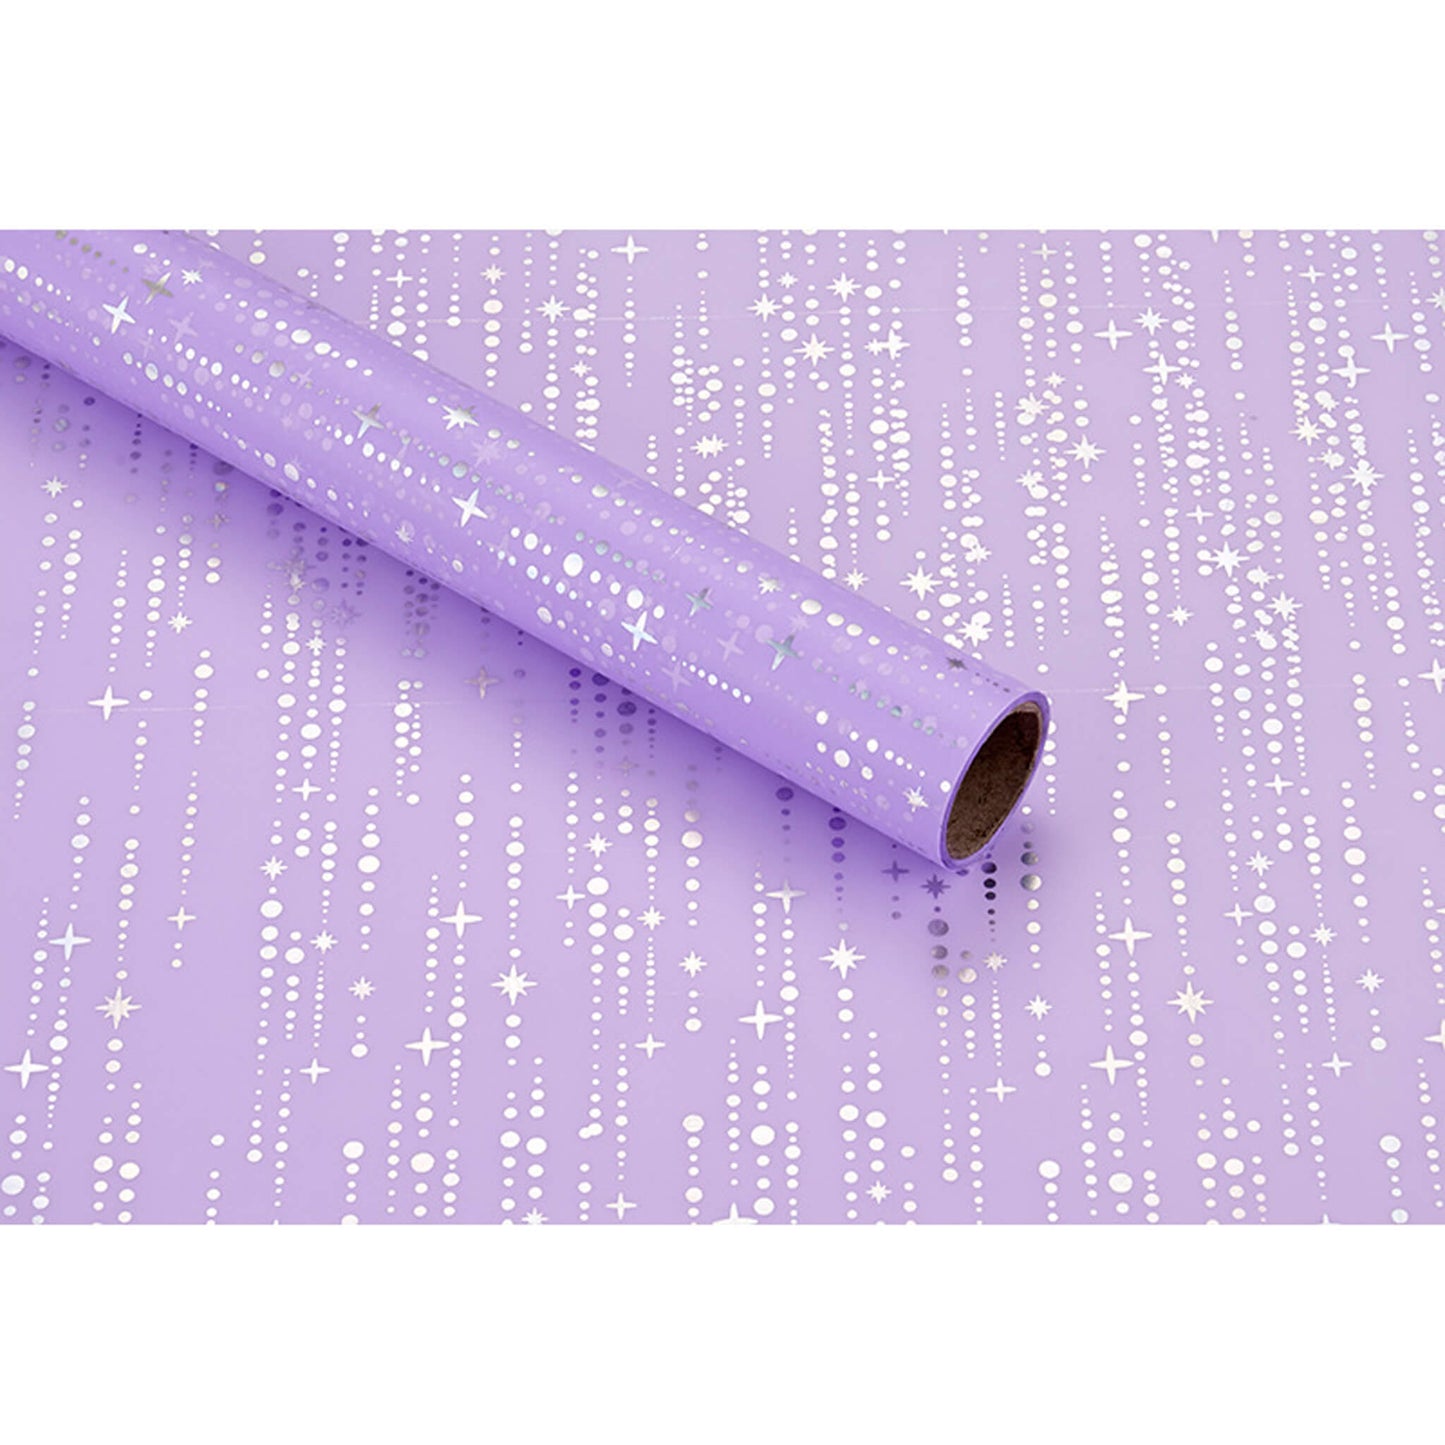 20 Sheets Florist Waterproof Colors Flower Wrapping Paper